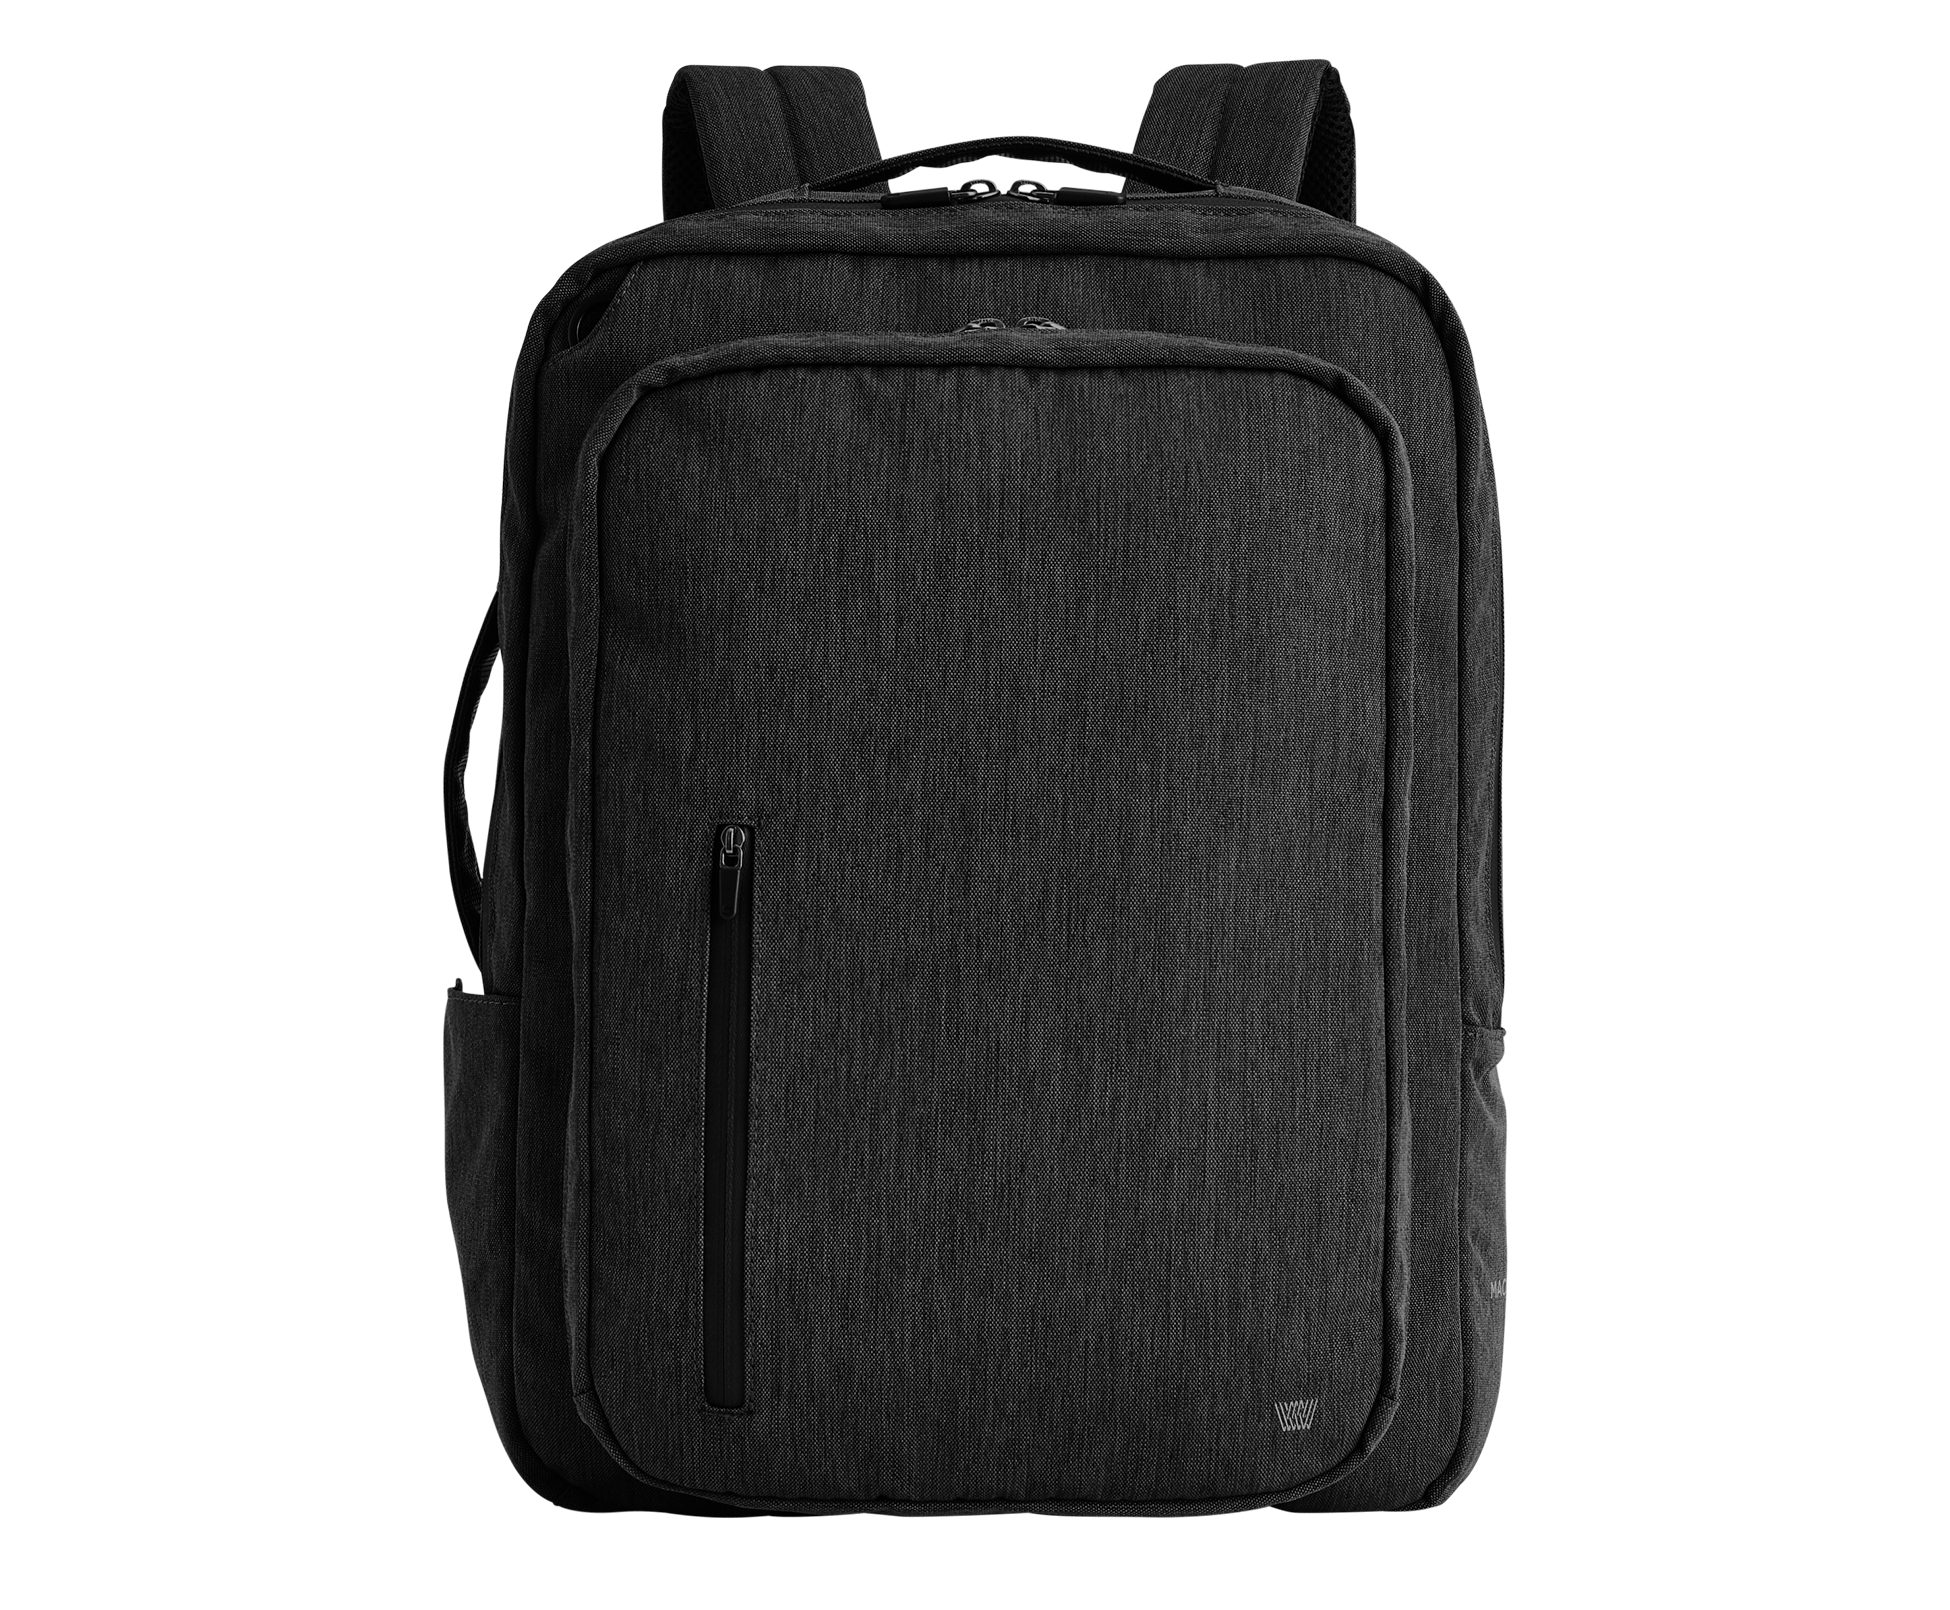 Amazon.com: Vanguard Alta Sky 66 Camera Backpack for Sony, Nikon, Canon  DSLR with up to 600 mm f/4 Lens,Grey